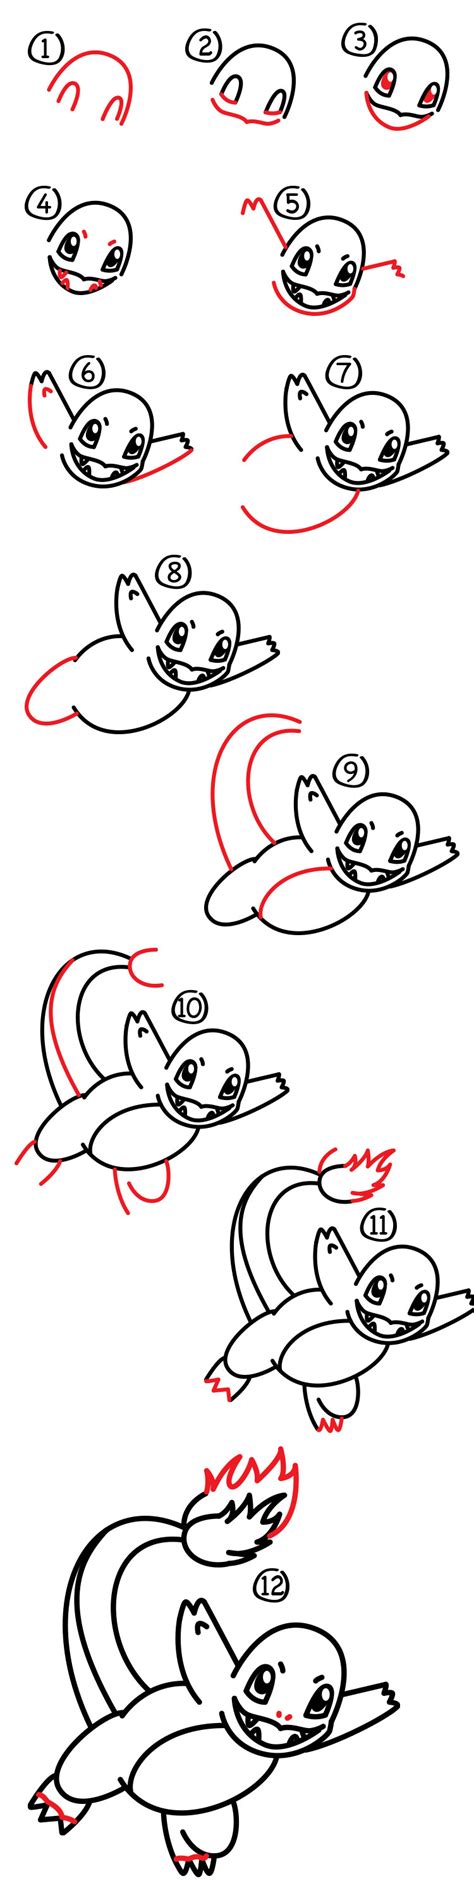 More images for how to draw pokemon charmander step by step easy » How To Draw Charmander Pokemon - Art For Kids Hub